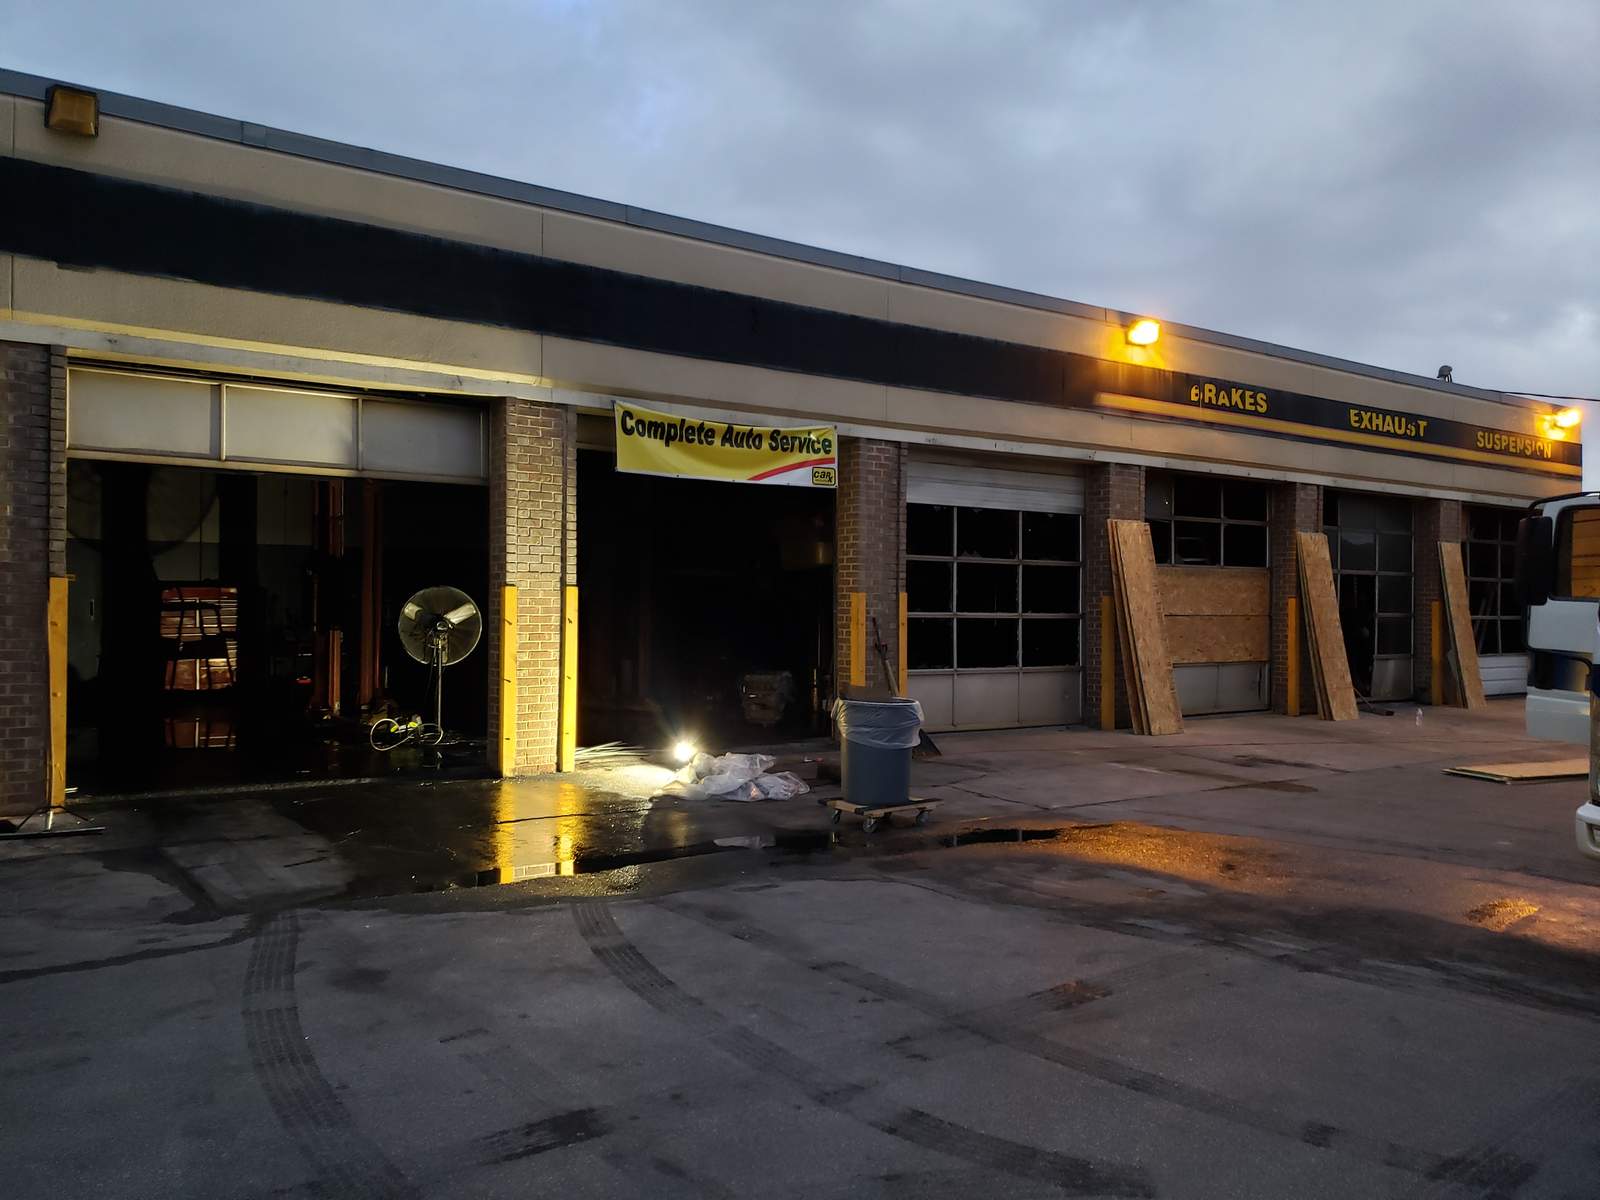 Quick response to auto shop fire may have prevented worse problems